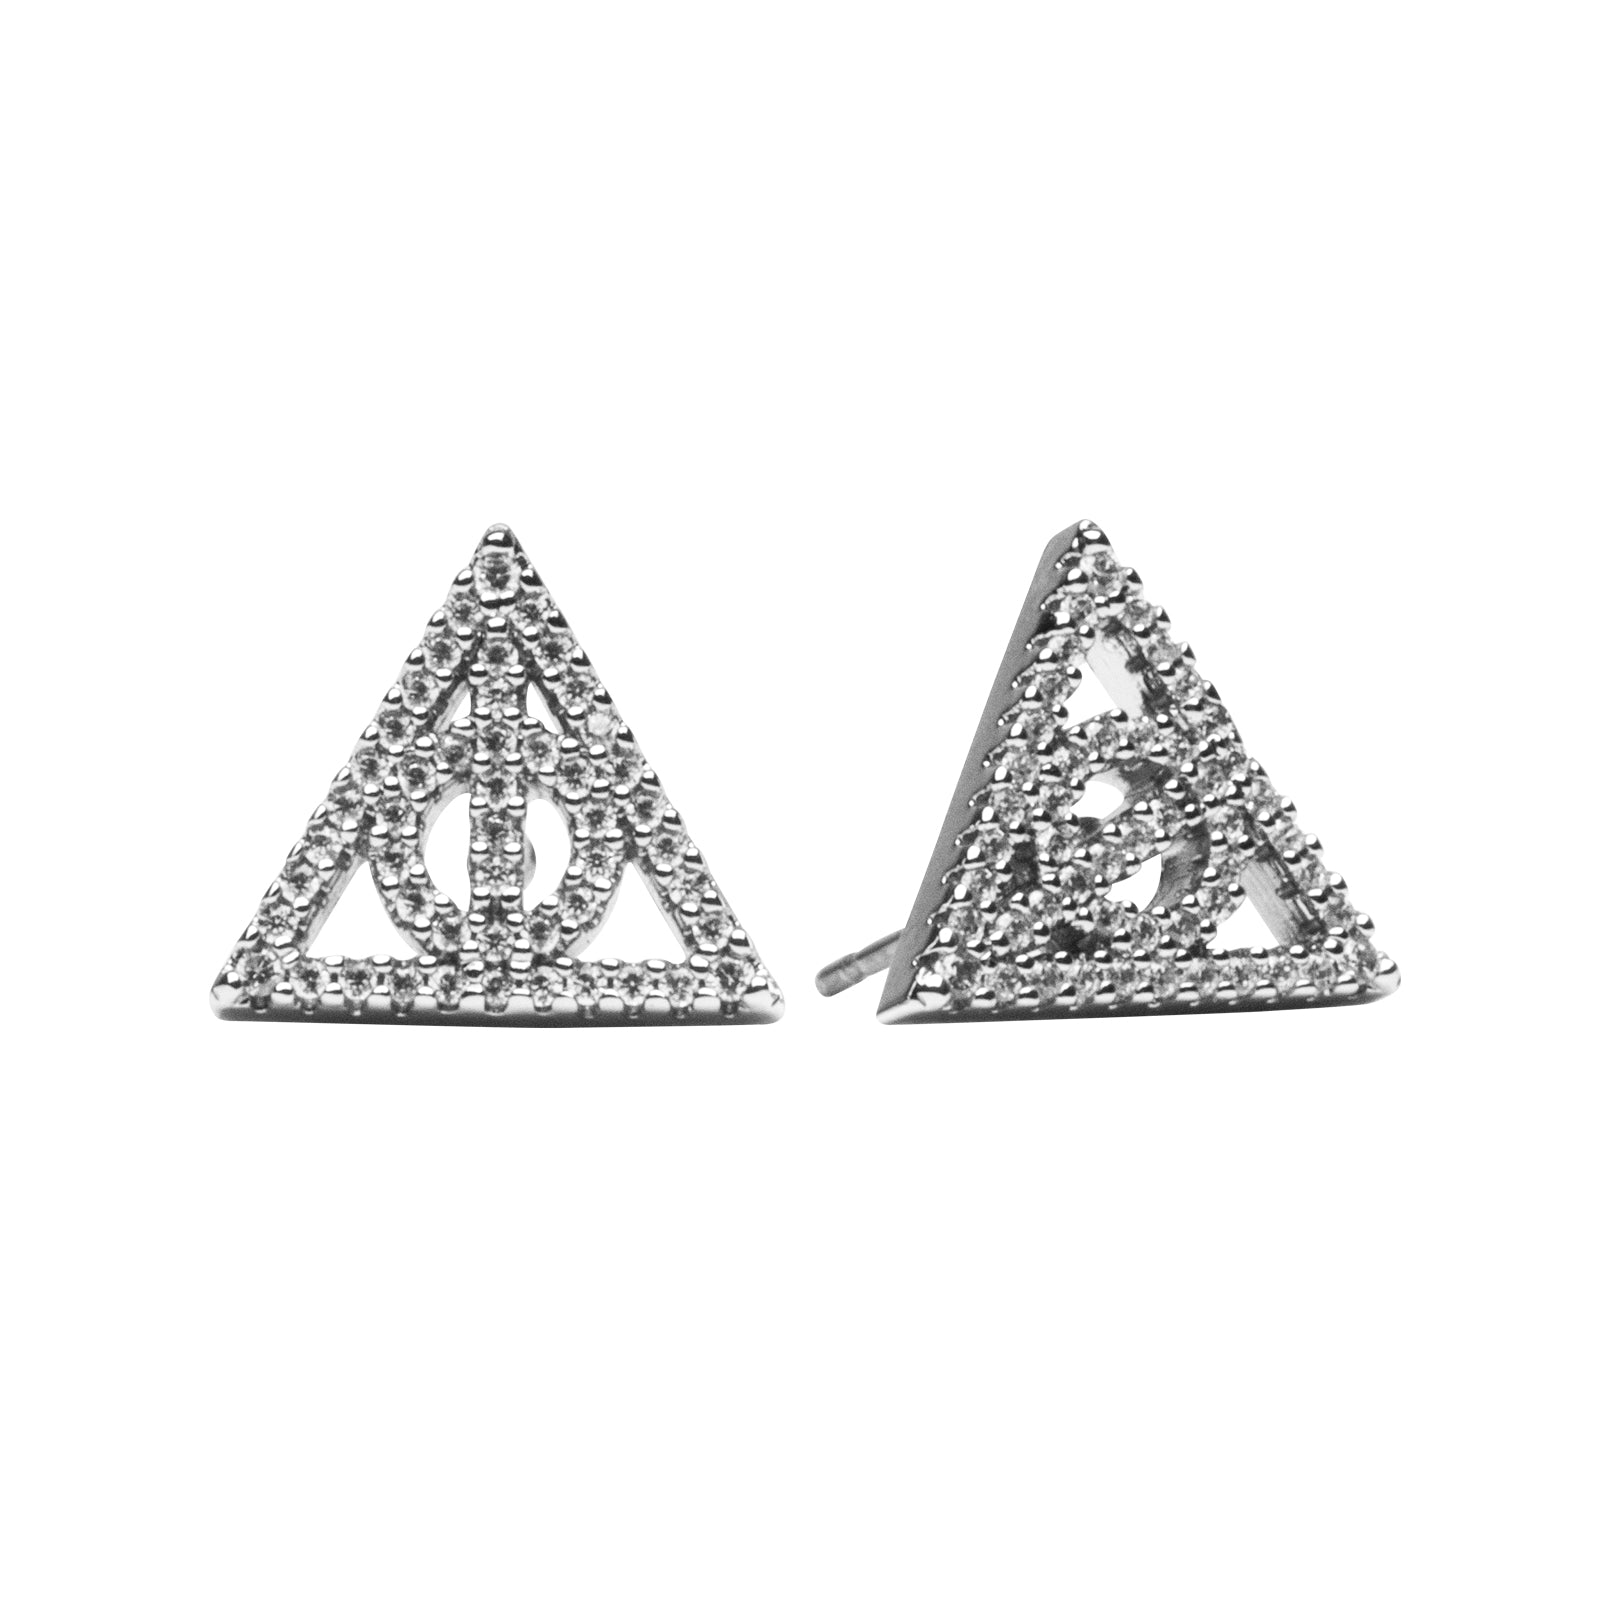 Origami Owl - Accio Harry Potter Charms…from the vault! In